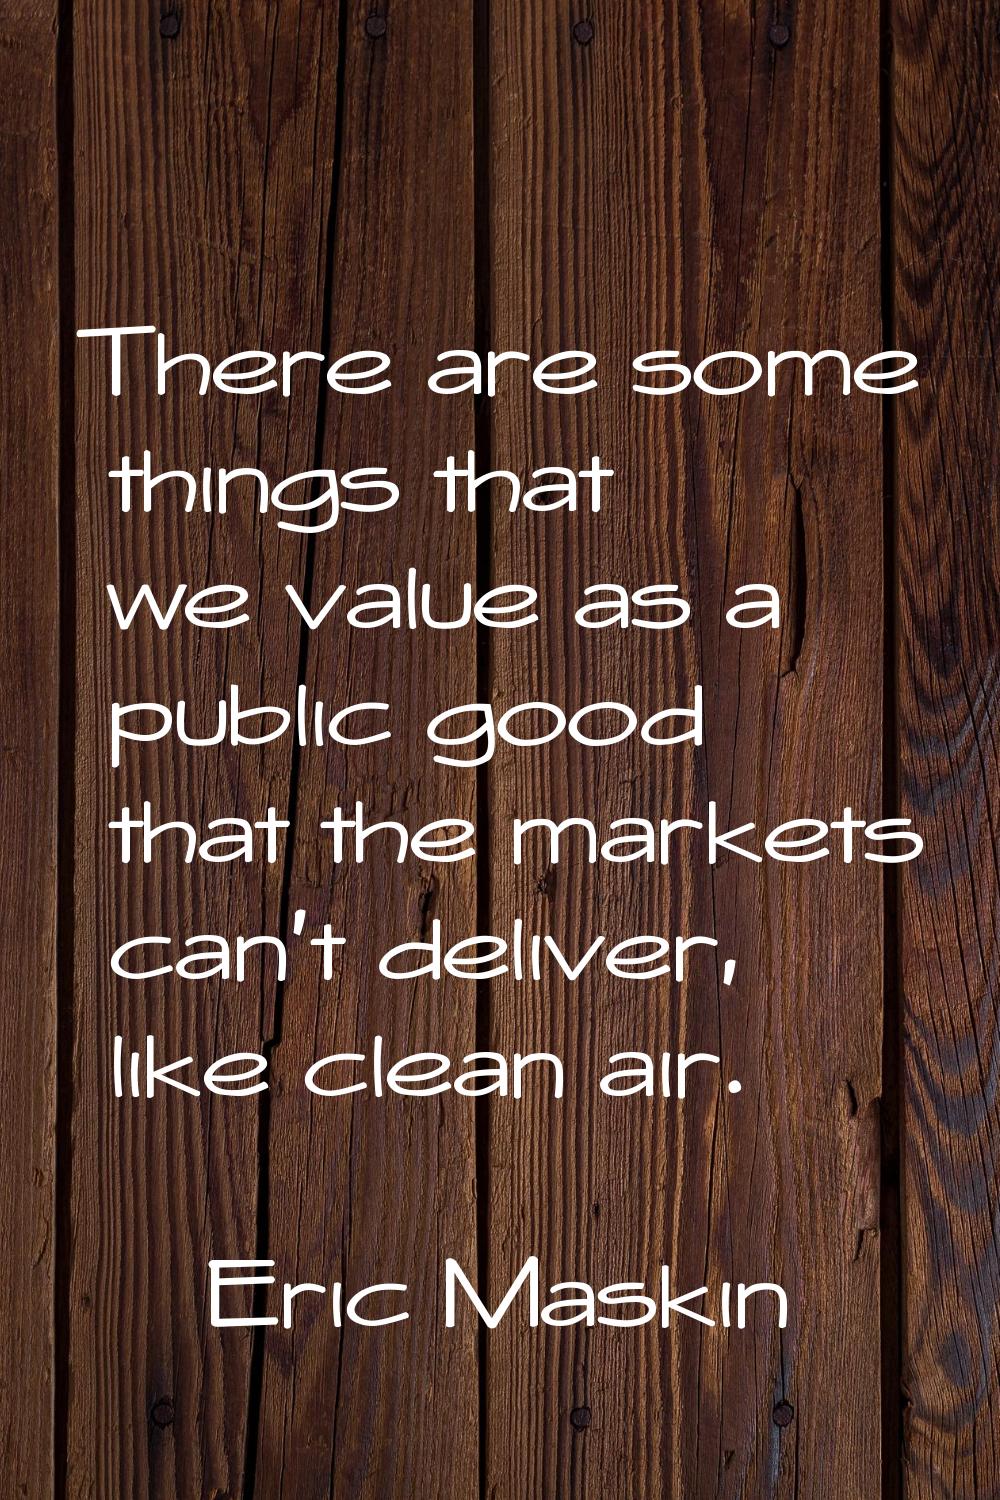 There are some things that we value as a public good that the markets can't deliver, like clean air